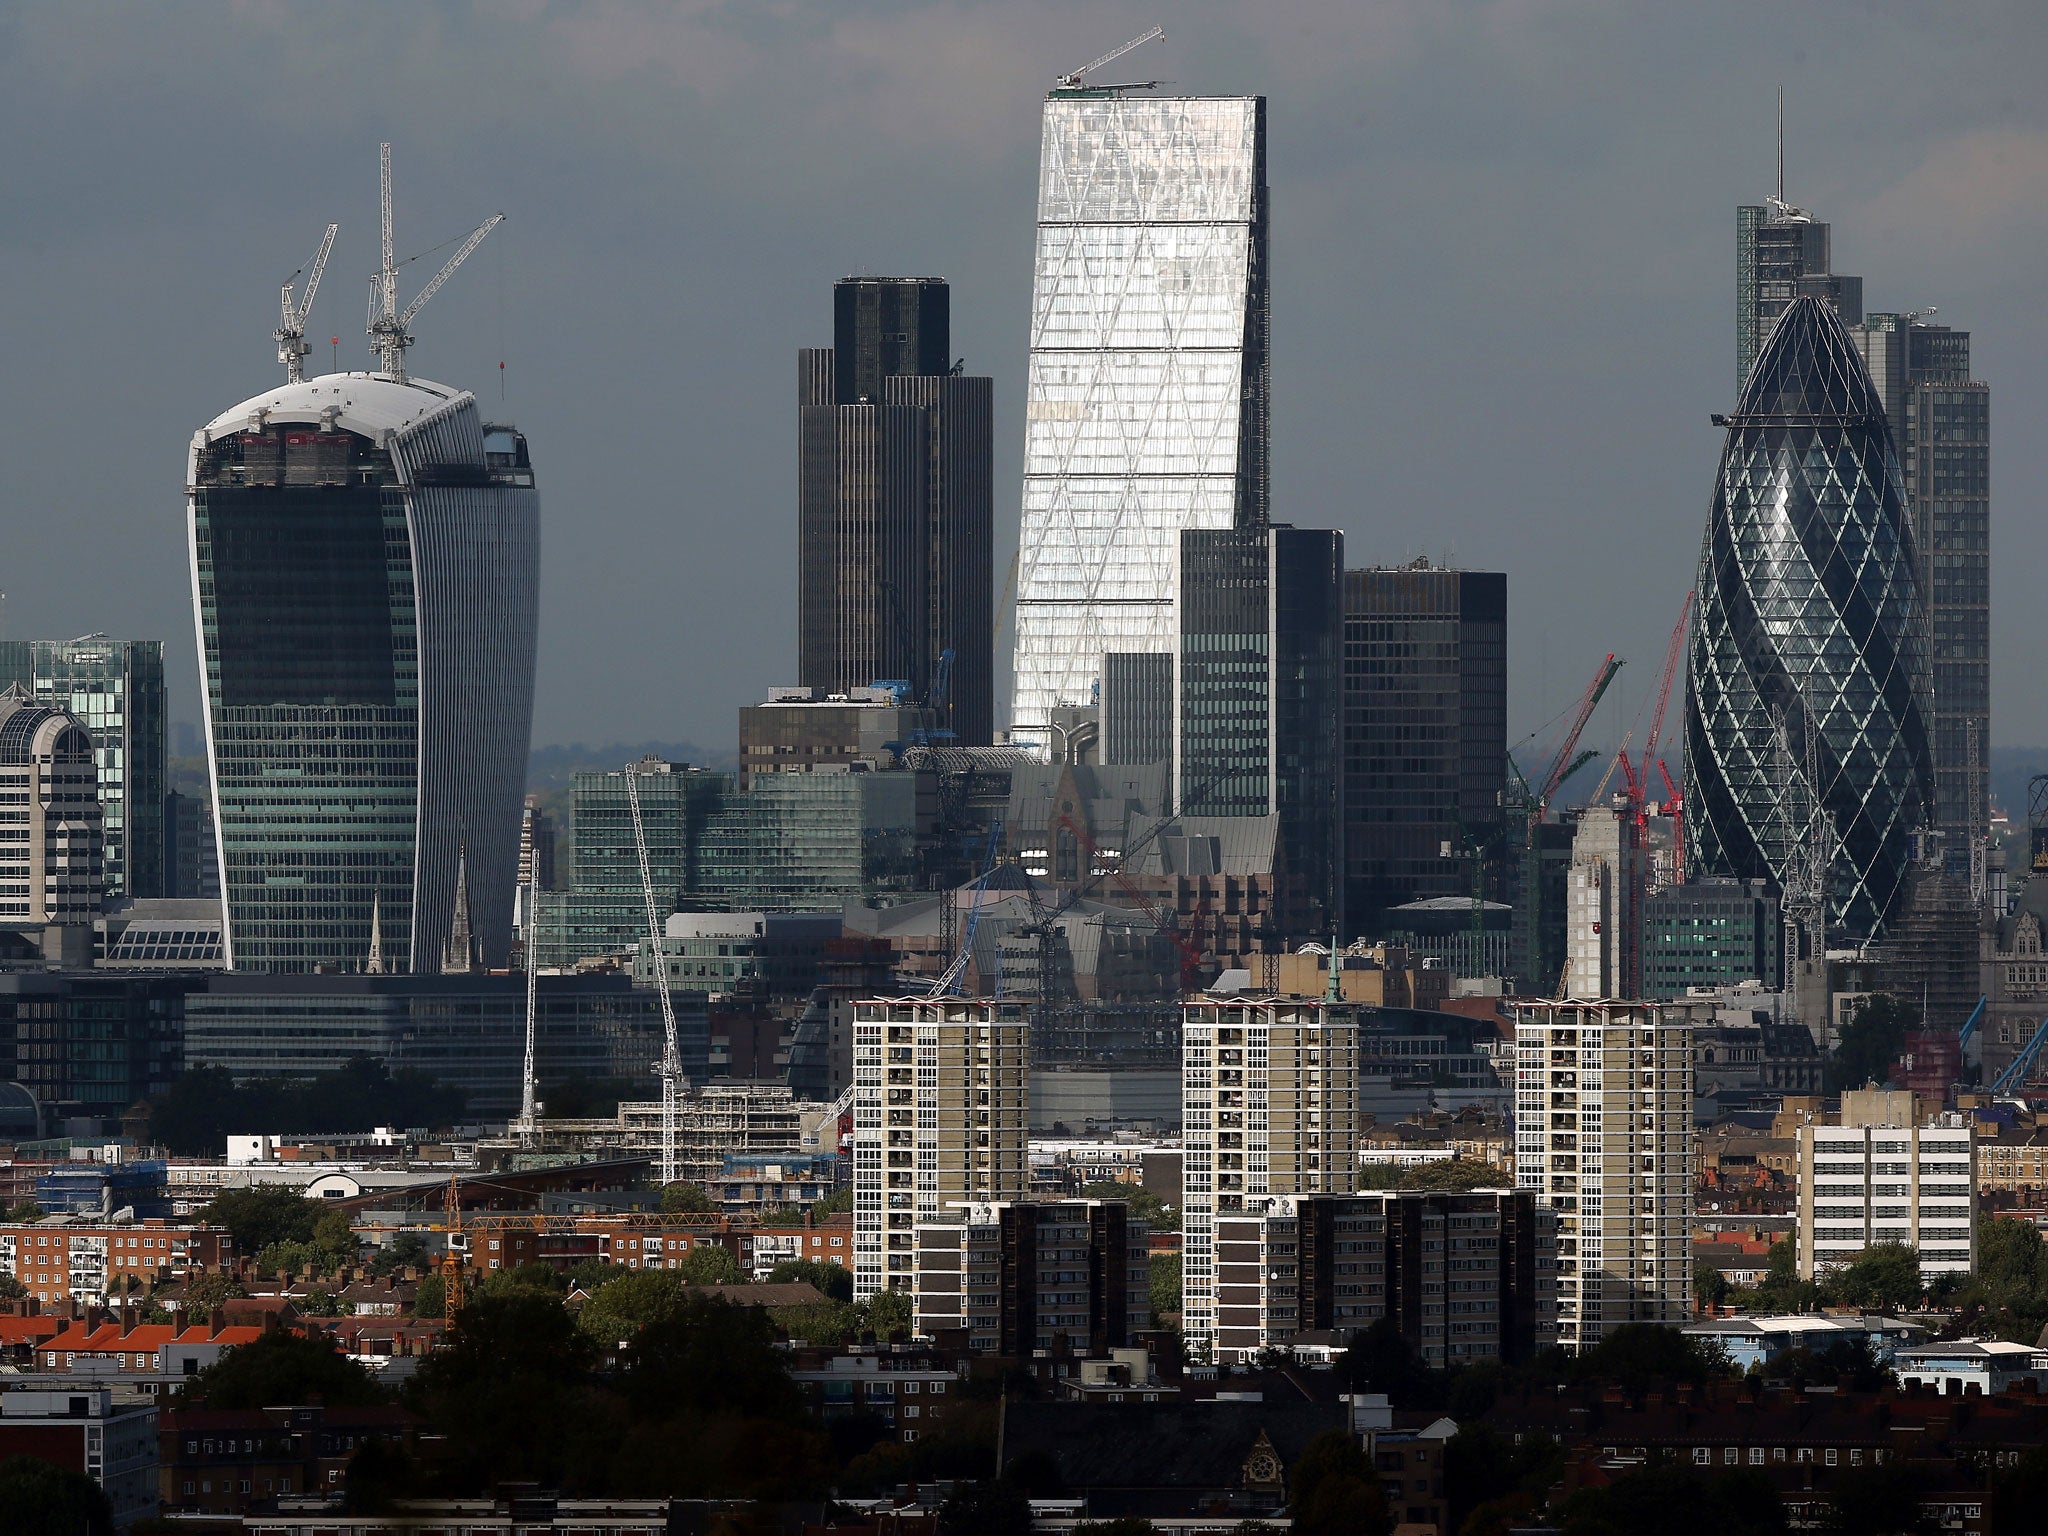 London named 'best city in the world' for foreign property investors